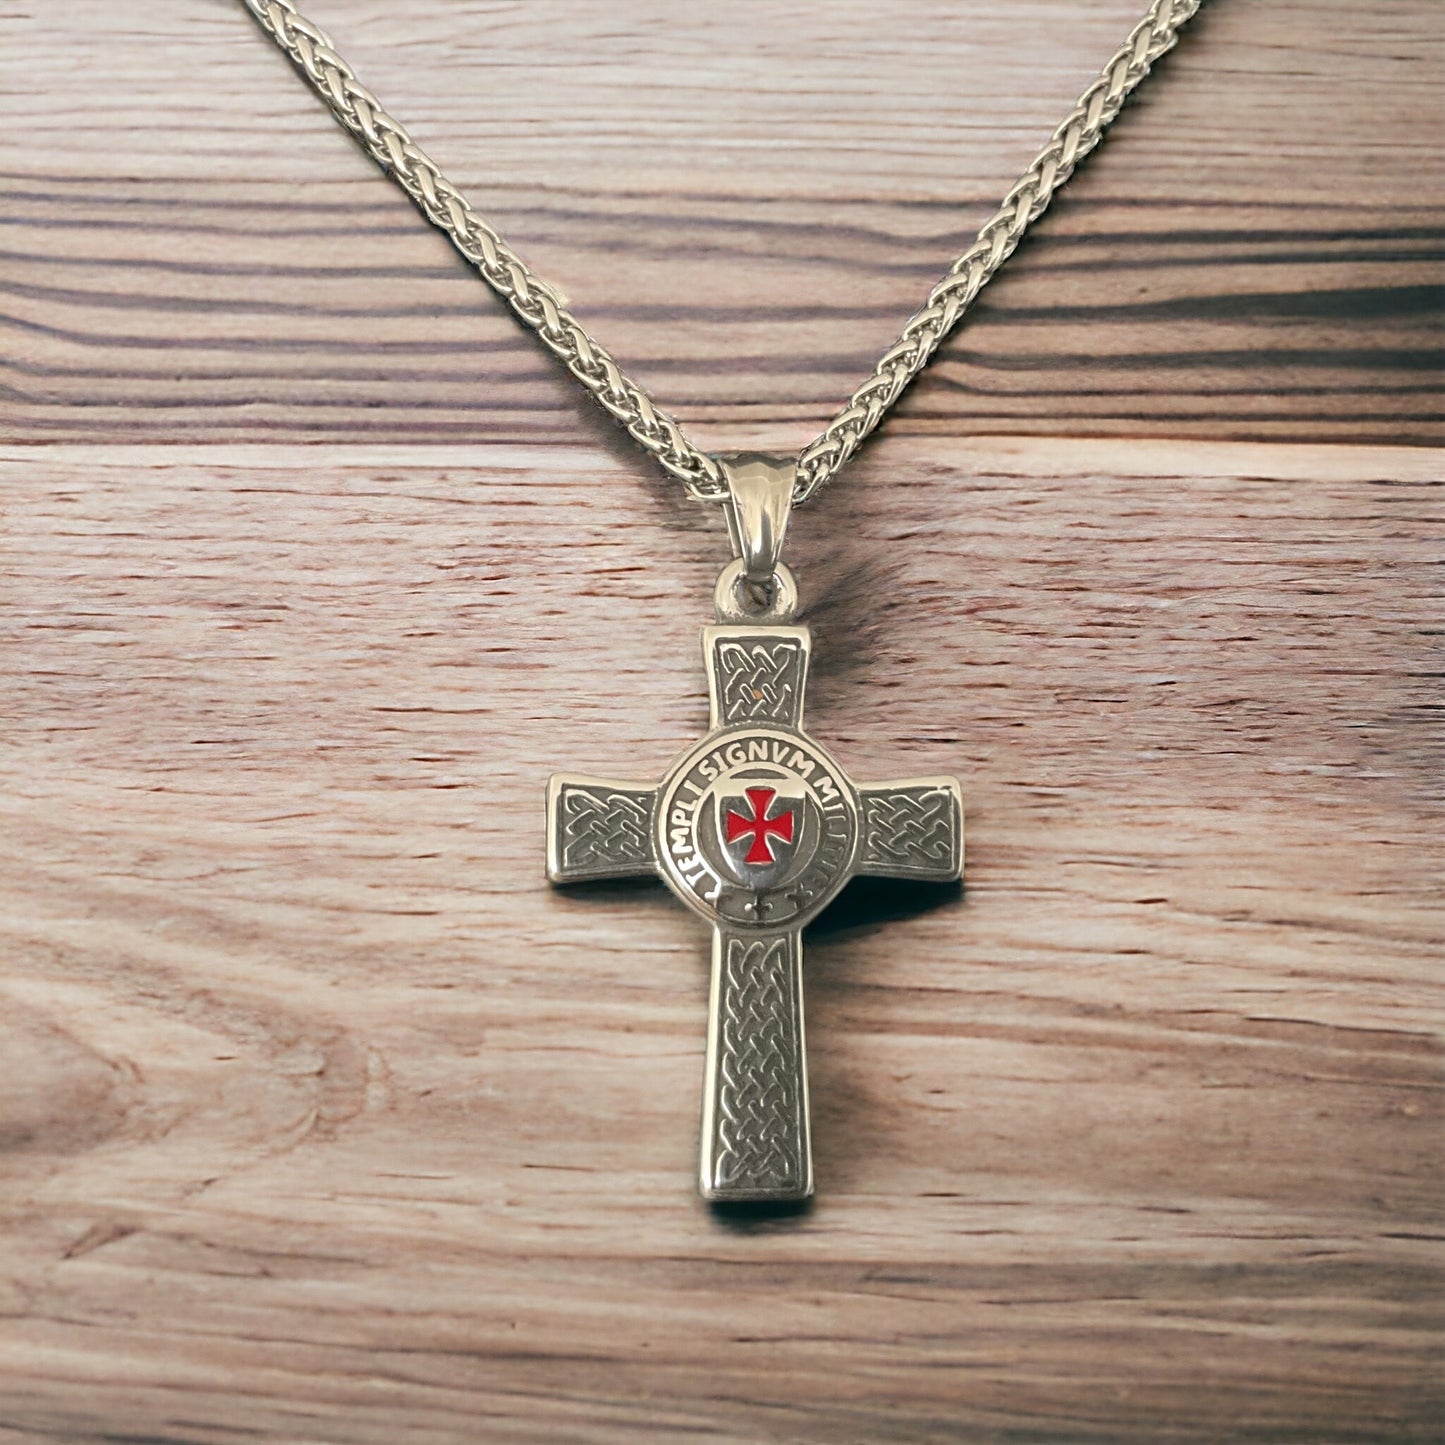 Large Double-Sided 316L Surgical Stainless Steel Crusader Knights Templar Cross Pendant + Free Chain Necklace